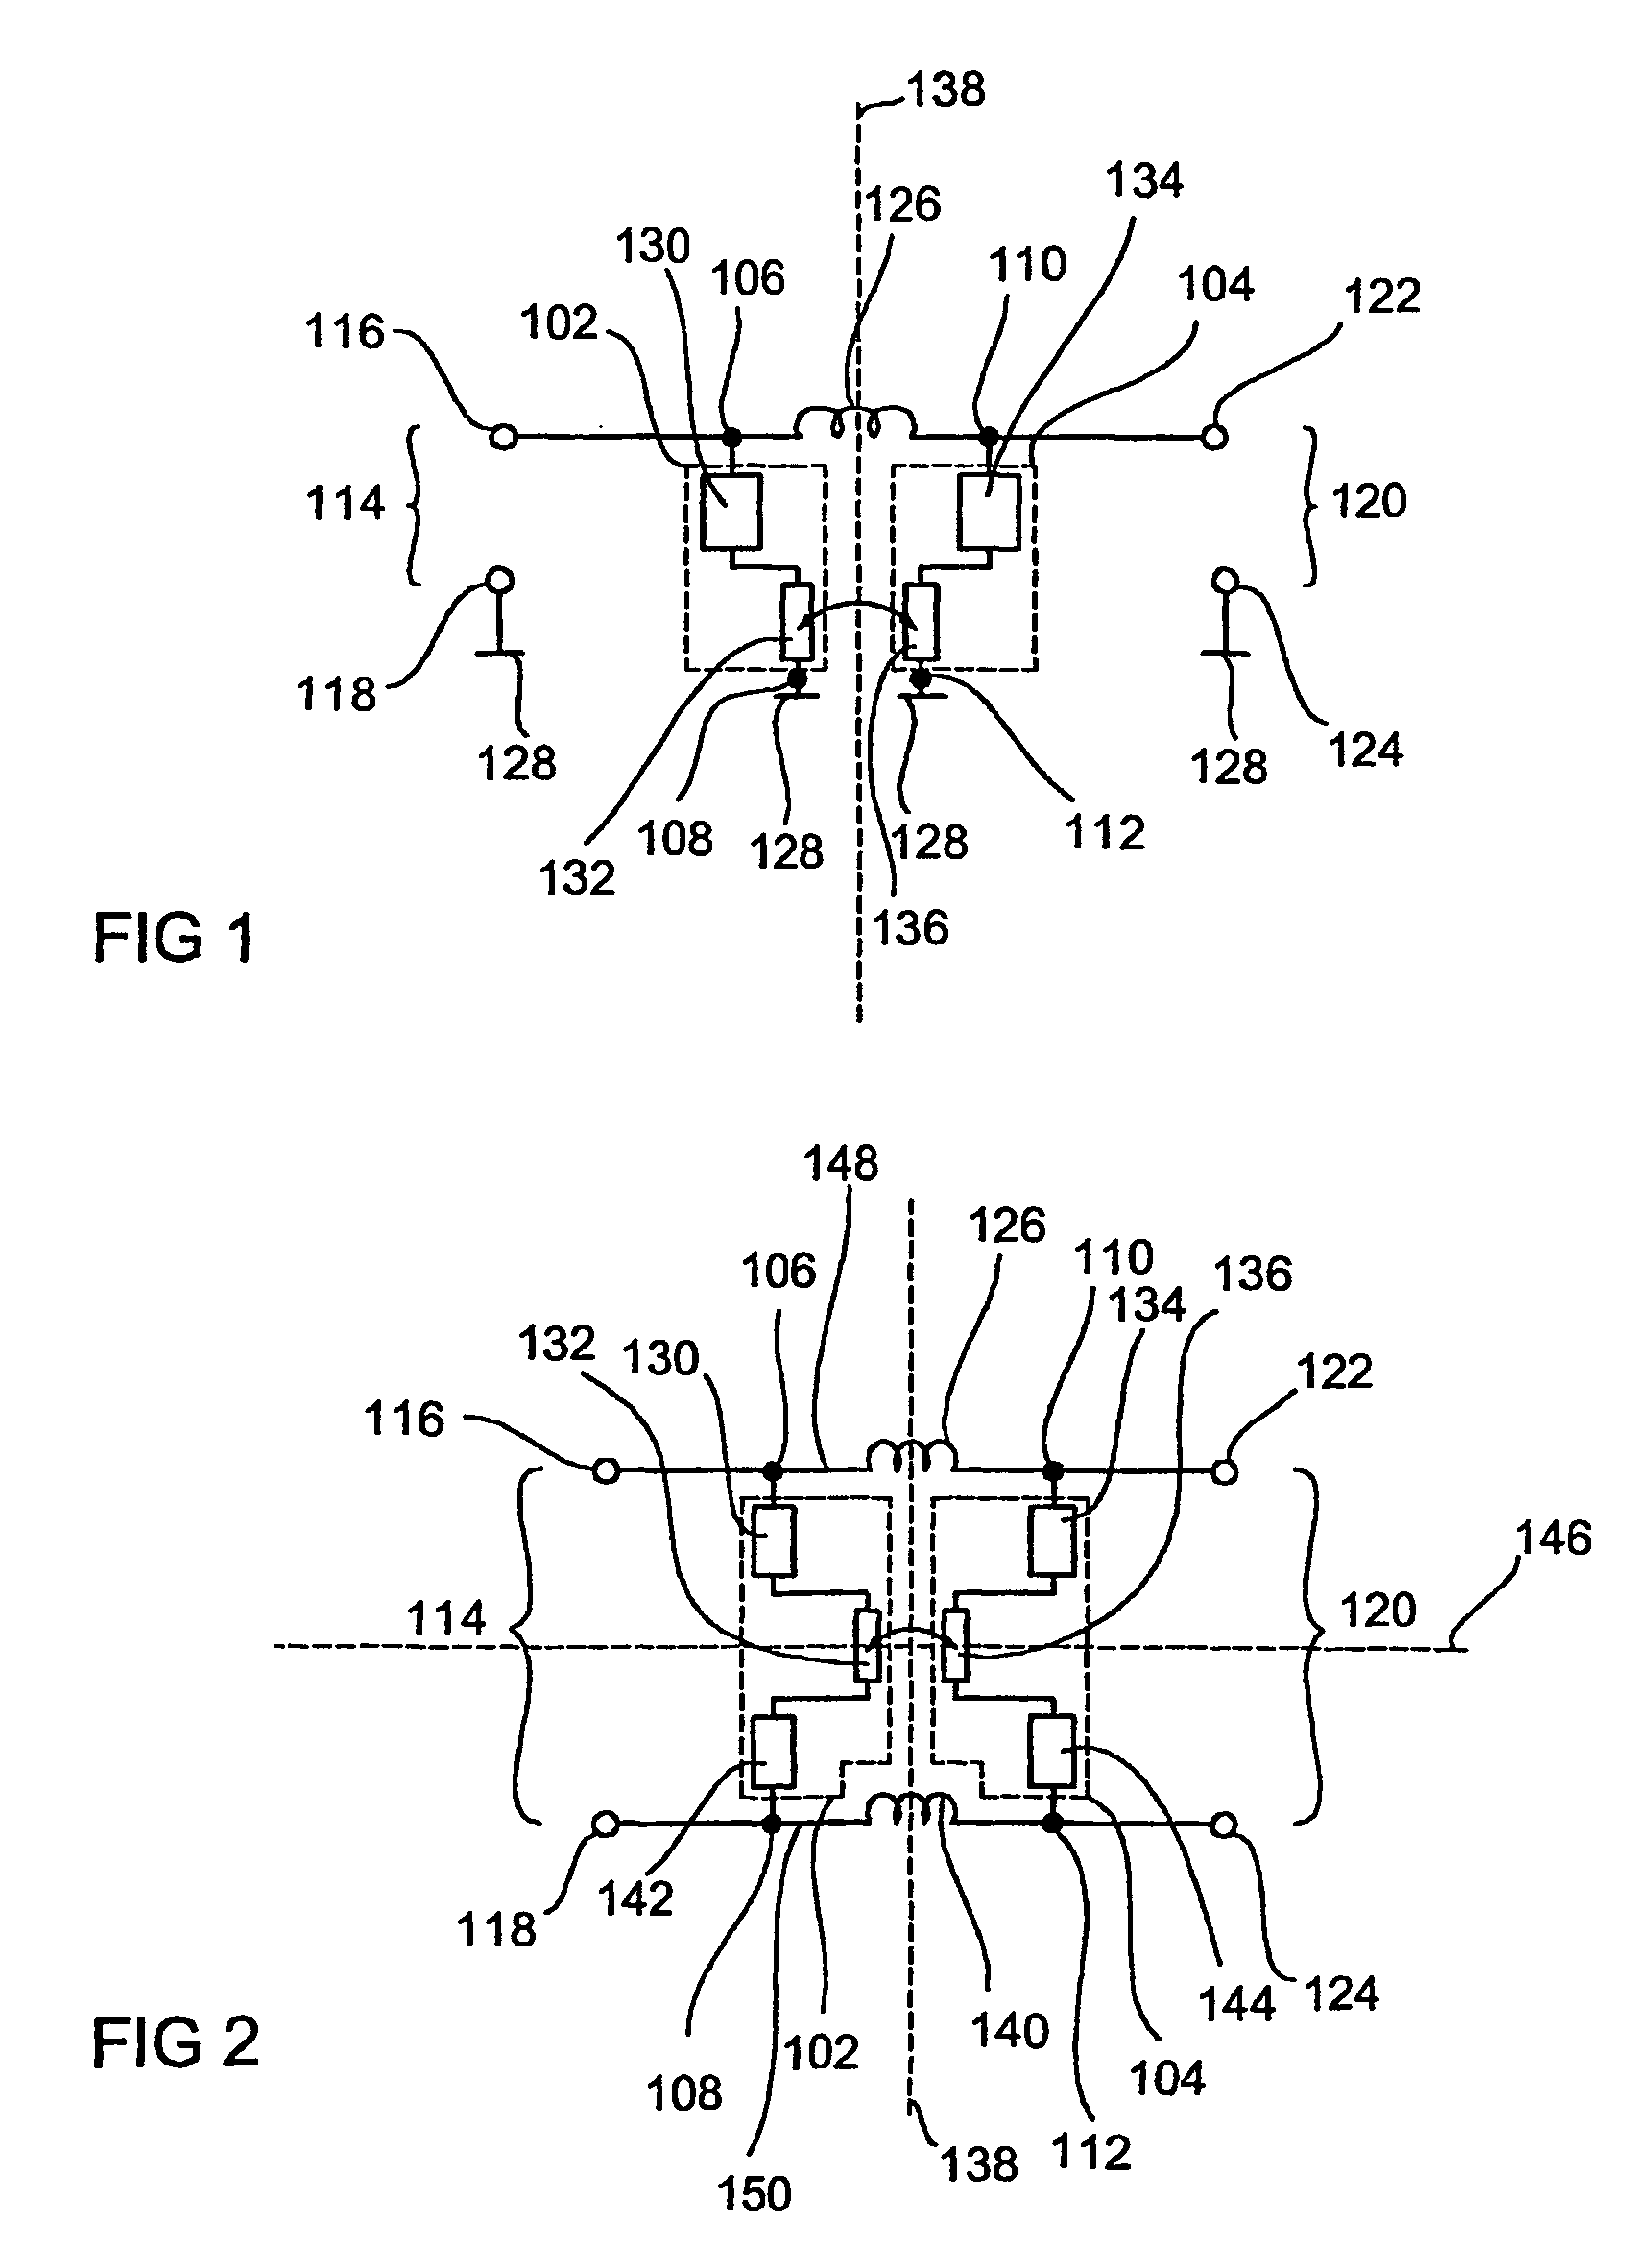 Filter arrangement for balanced and unbalanced line systems